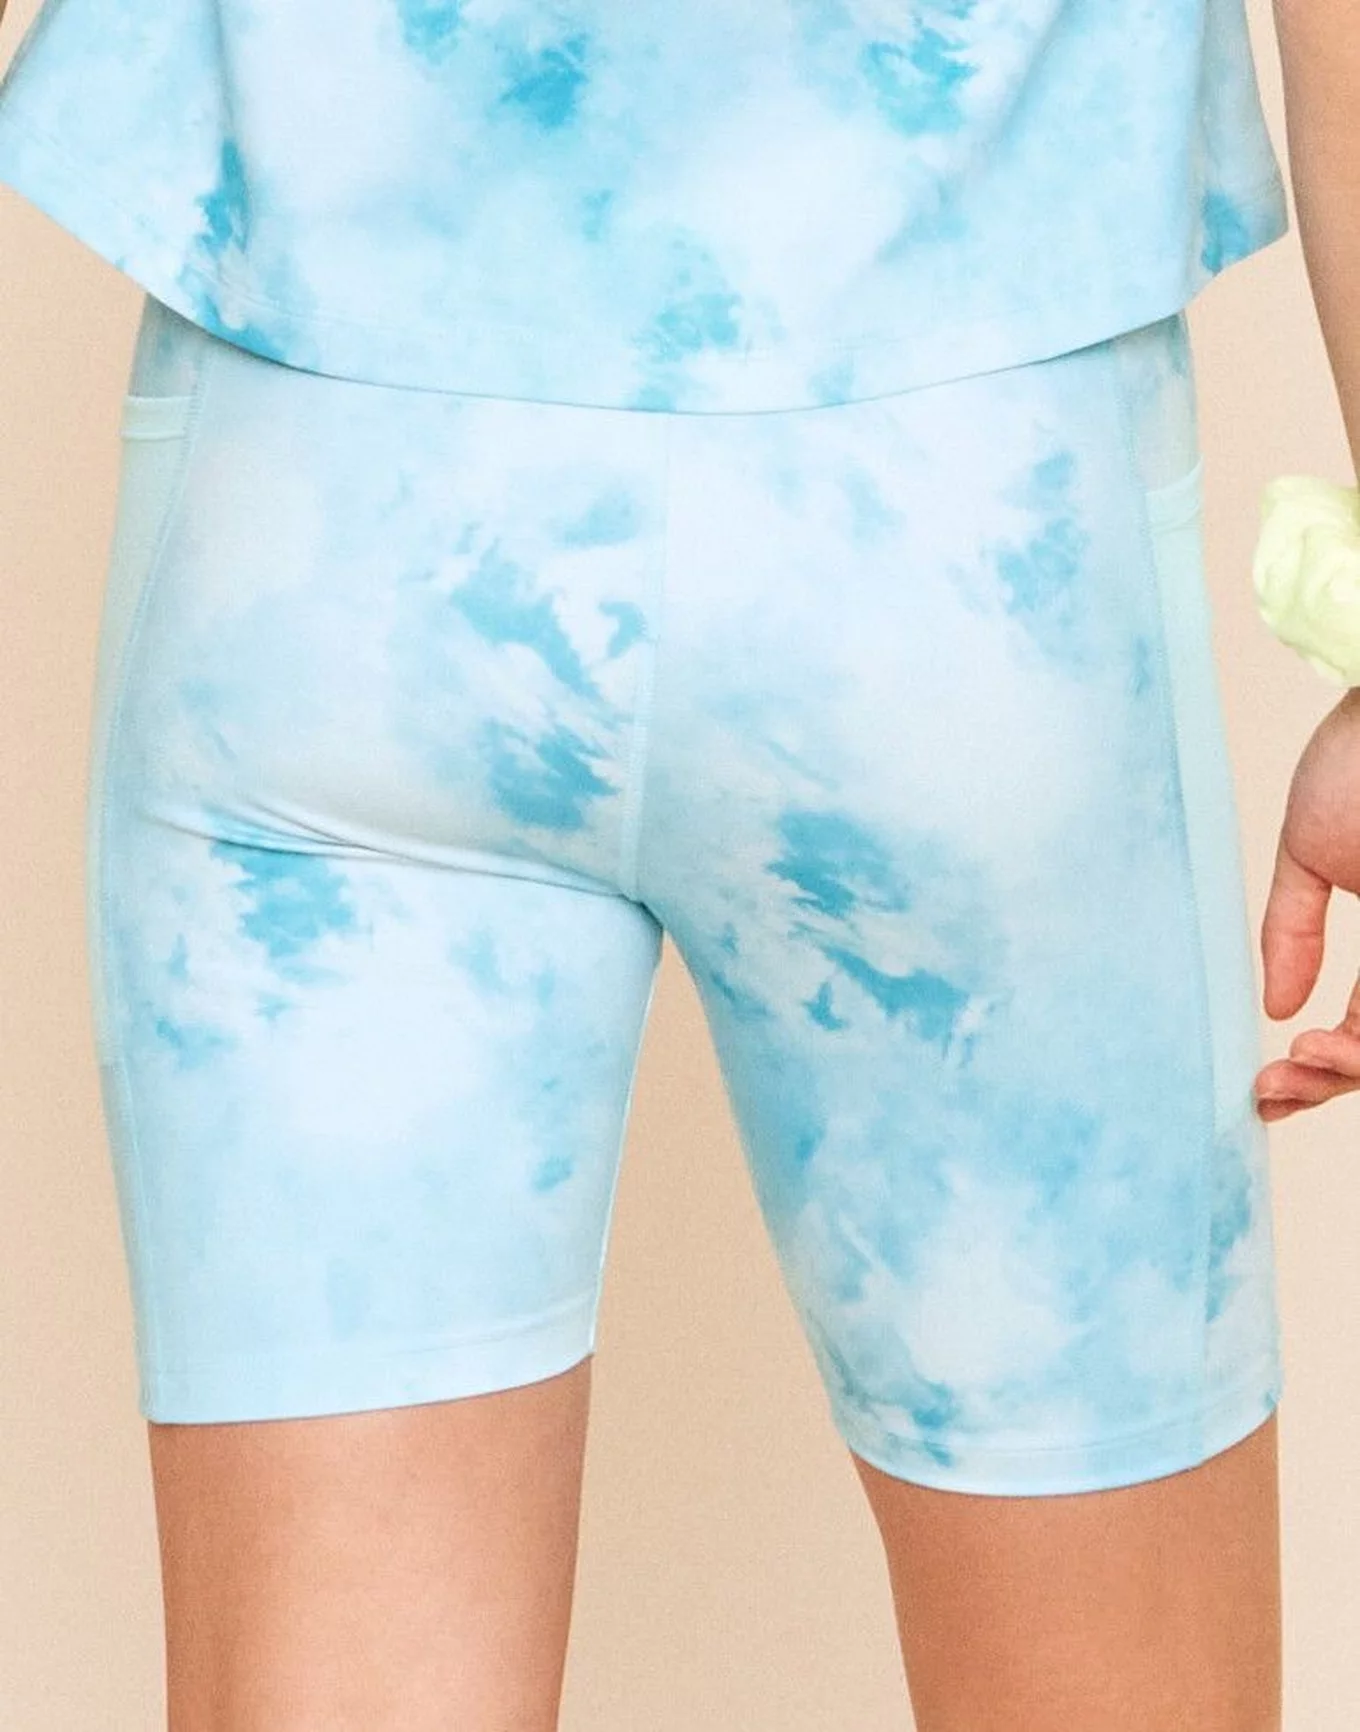 Aqua Blue Lace Detail Shorts Size 3 Small Summer Travel Booty